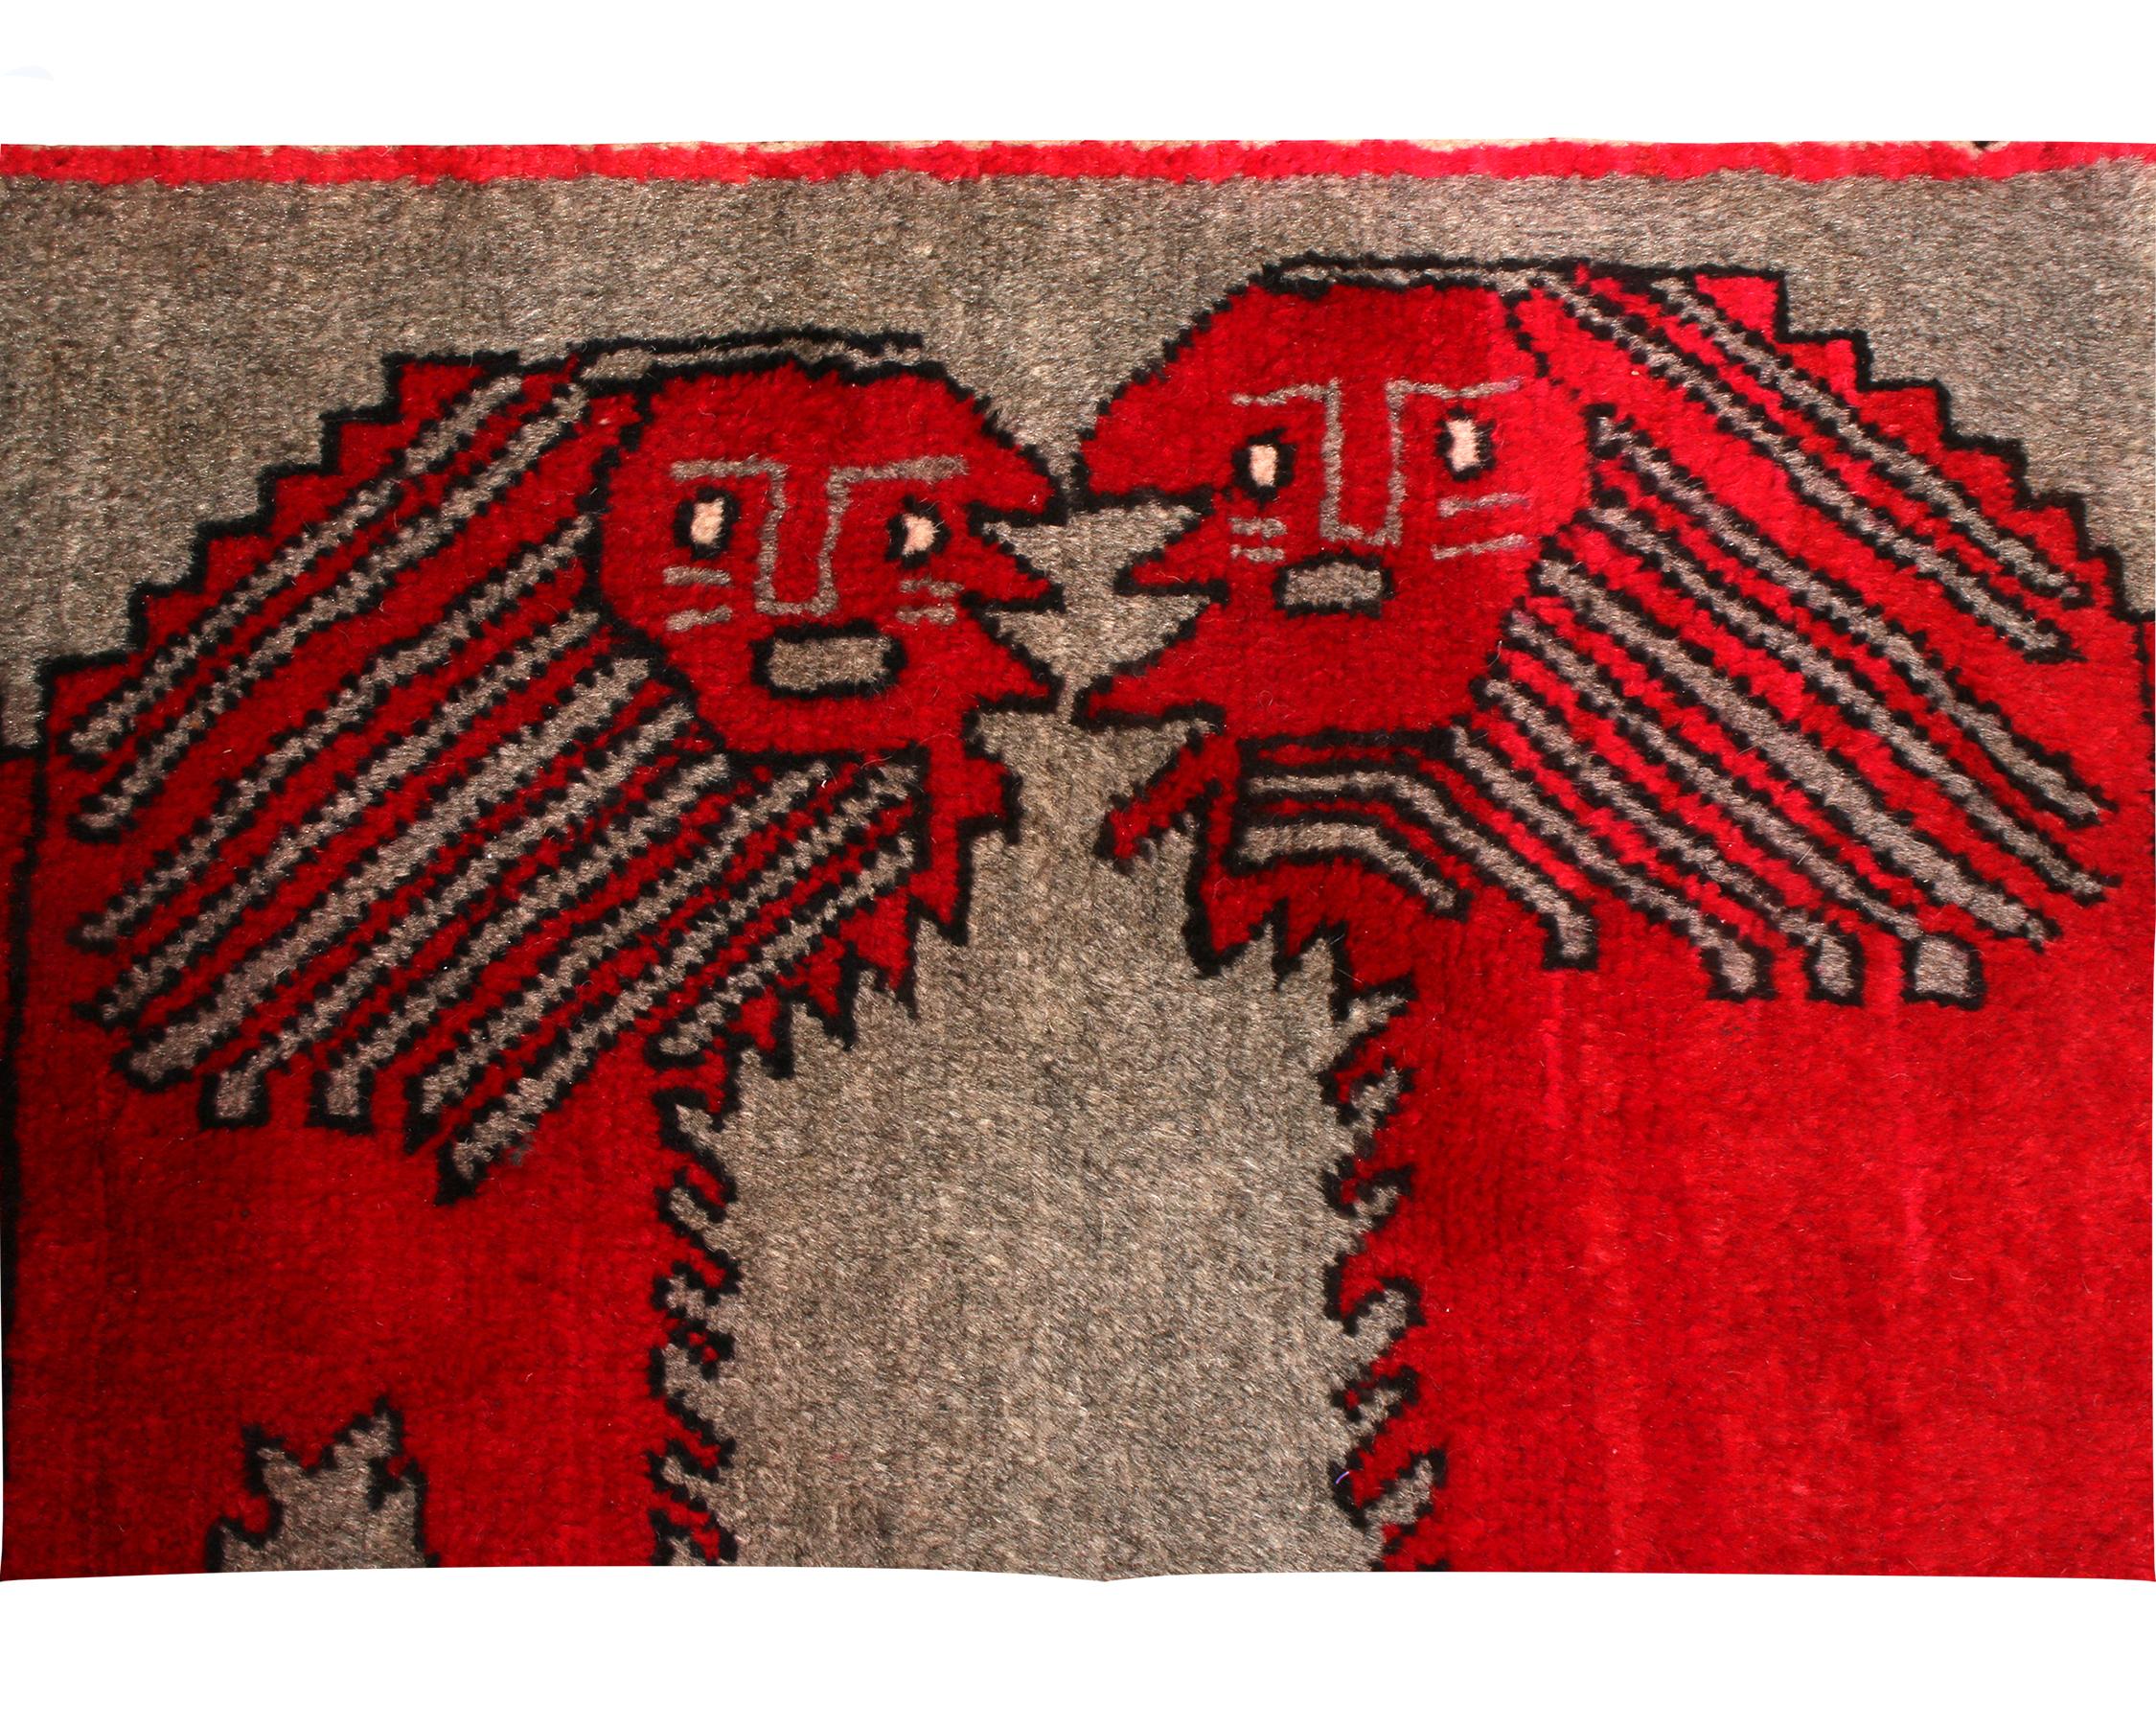 Hand knotted in wool pile originating from Persia between 1950-1960, this vintage Gabbeh Persian rug is unique among the acclaimed pictorial pieces of its family for enjoying a minimalistic, more dignified background over the abundantly wild, tribal